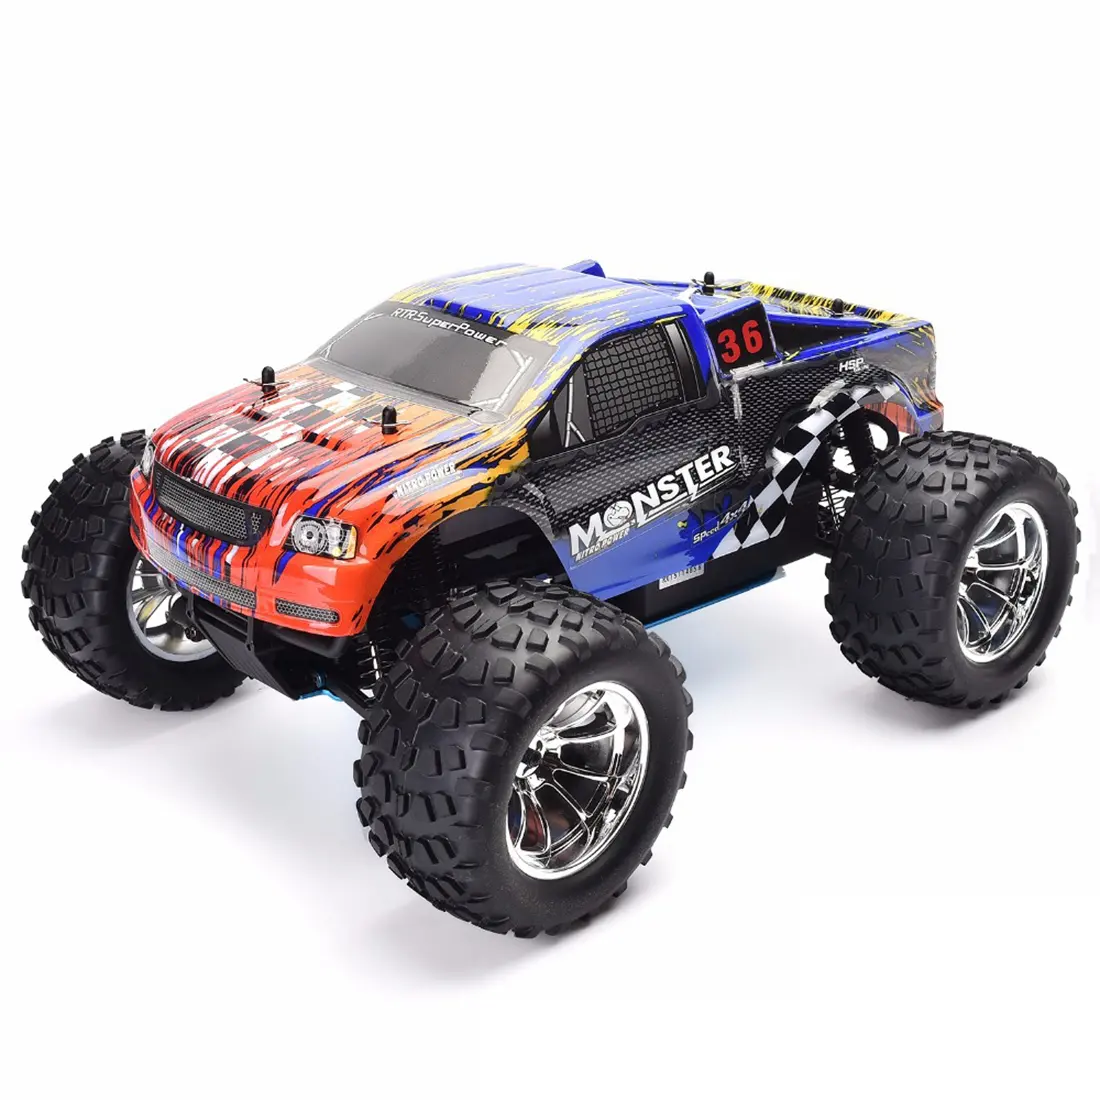 RC Car 1:10 Scale Two Speed Off Road Monster Truck gas 4wd Remote Control Car High Speed Hobby Racing RC Vehicle HSP 94188